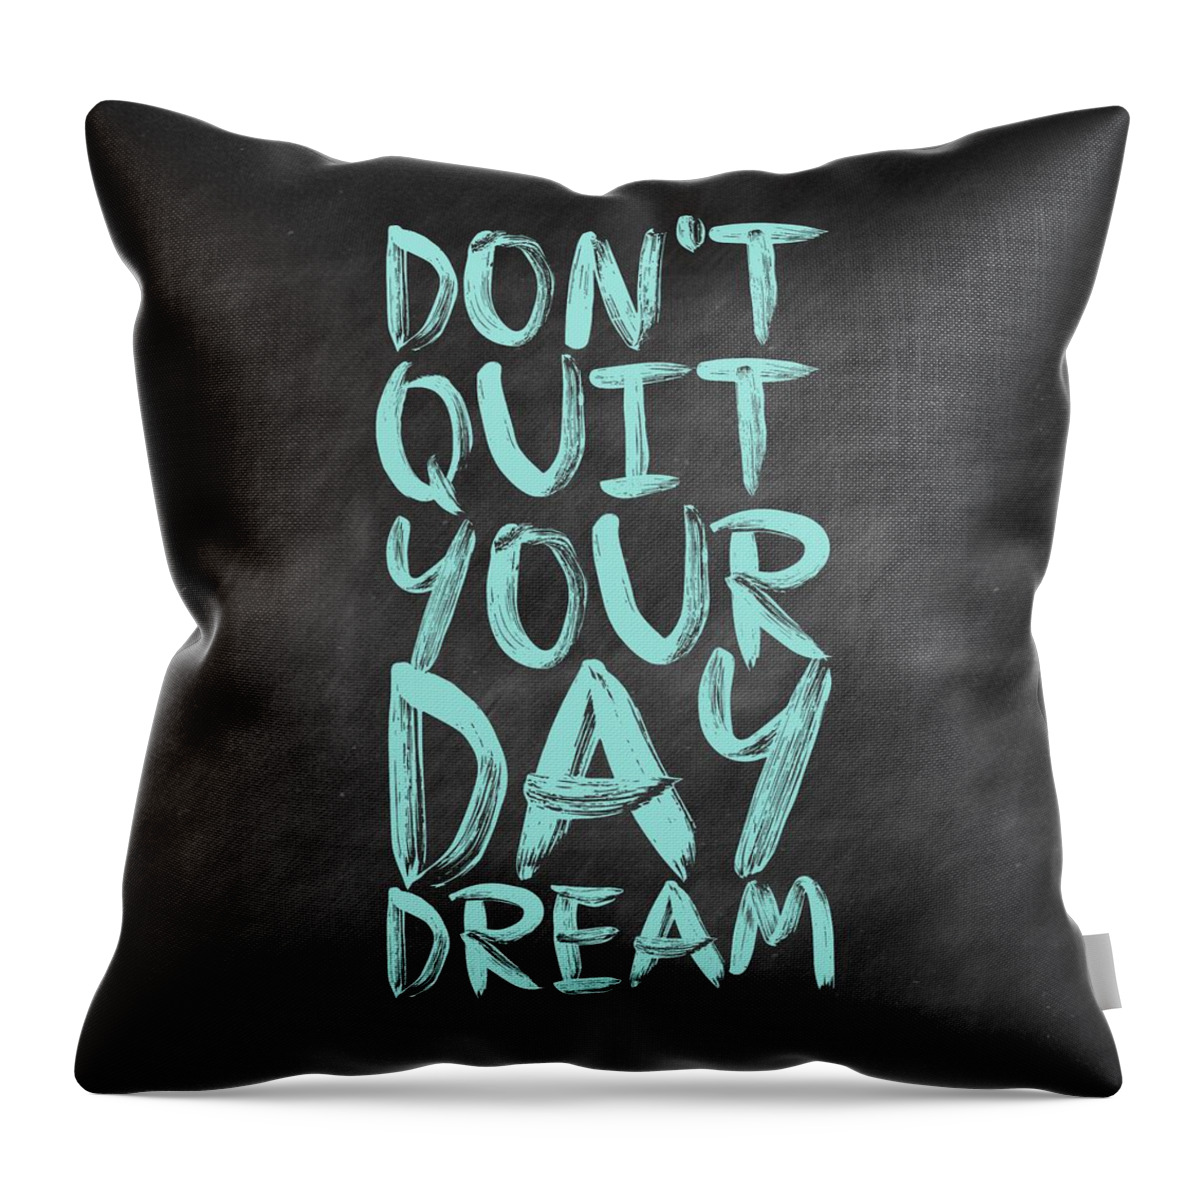 Inspirational Quote Throw Pillow featuring the digital art Don't Quite Your Day Dream Inspirational Quotes poster by Lab No 4